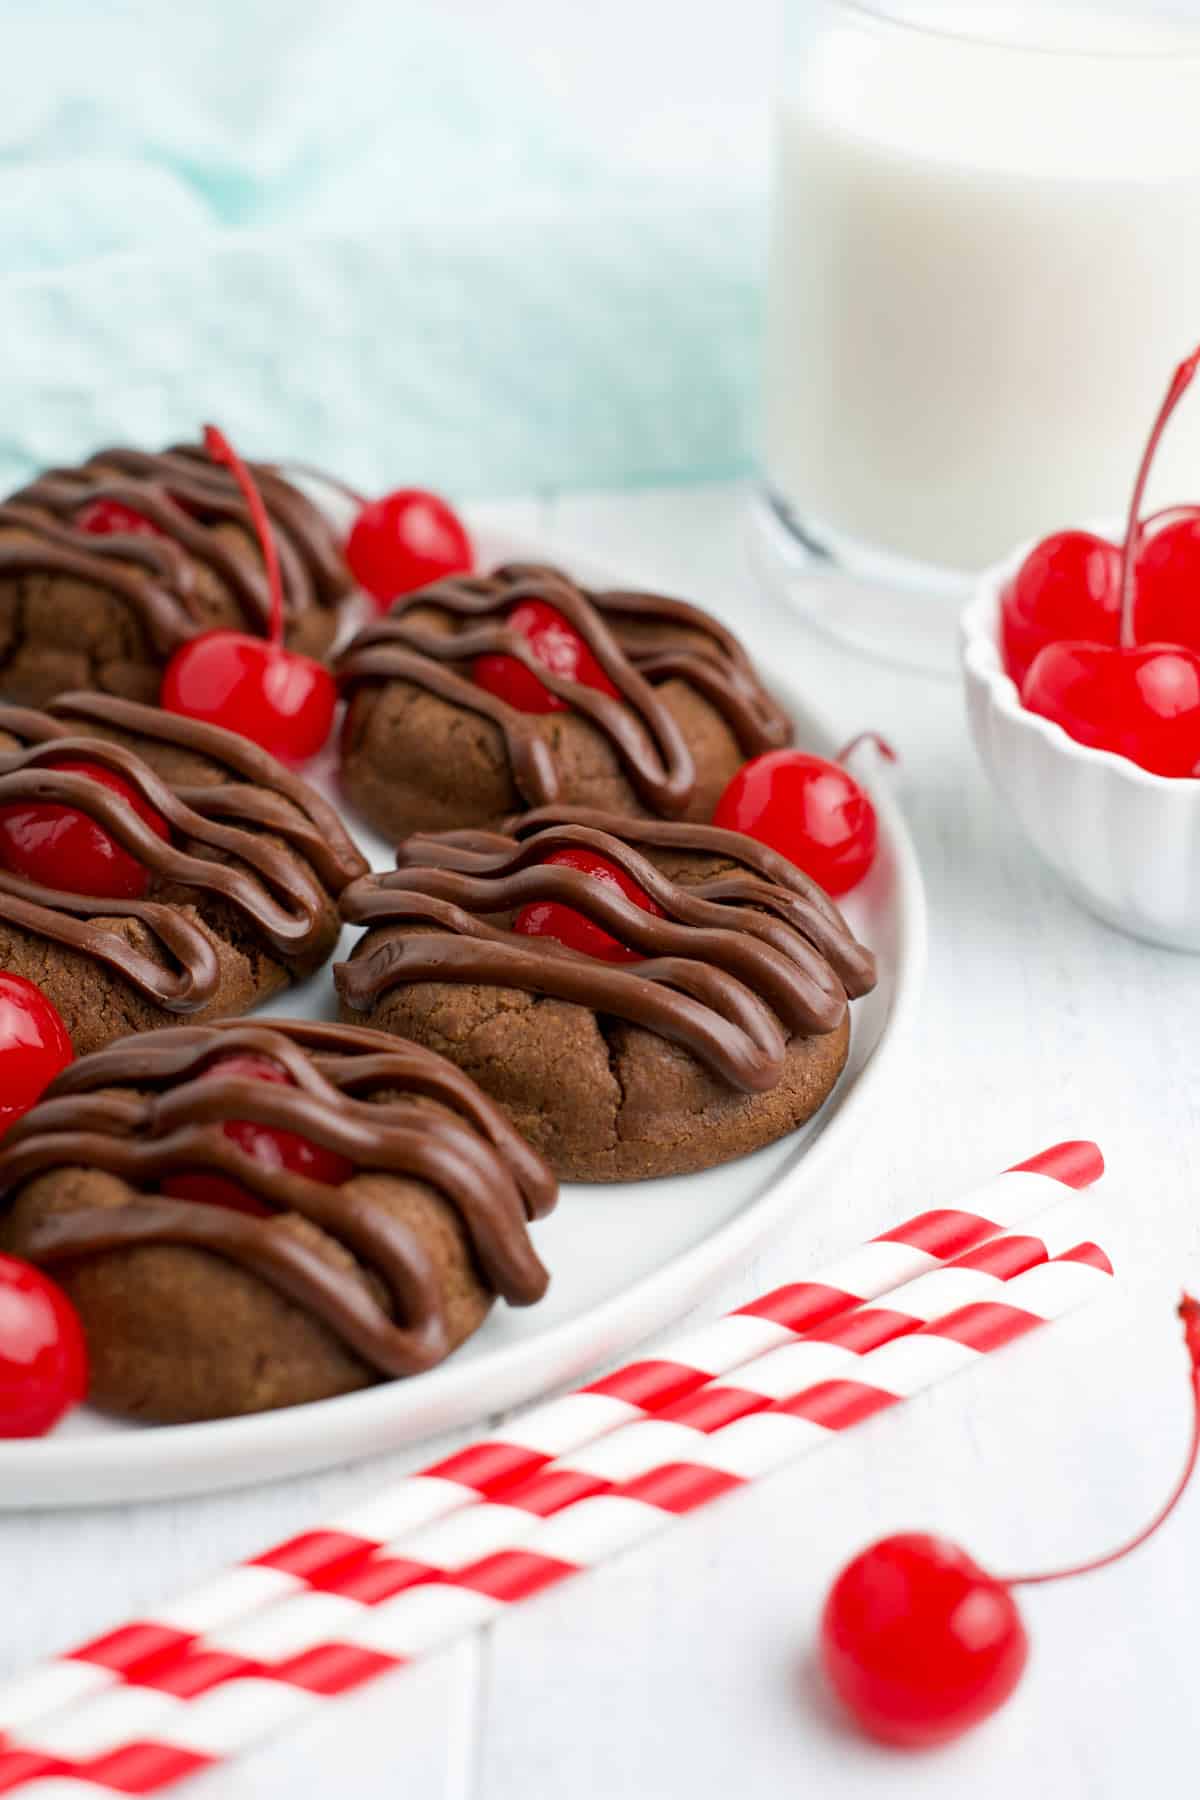 Cherry chocolate cookies on a plate with a glass of milk and a bowl of cherries.